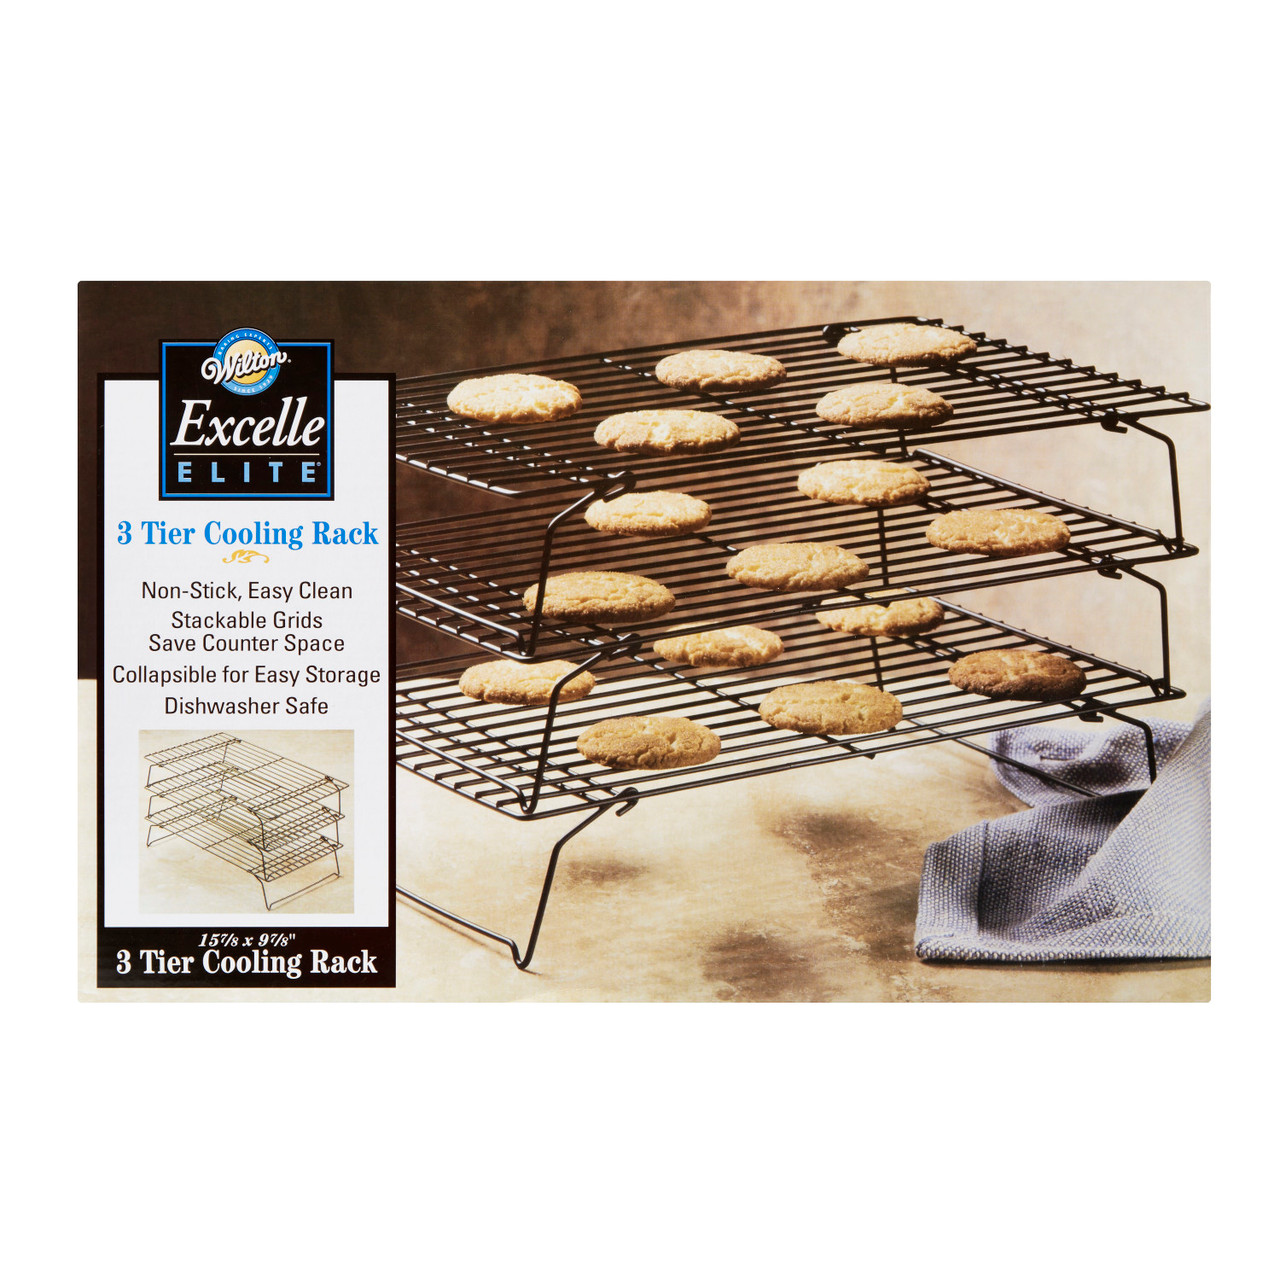 Excelle Elite 3-Tier Cooling Rack for Cookies, Cakes and More - Wilton